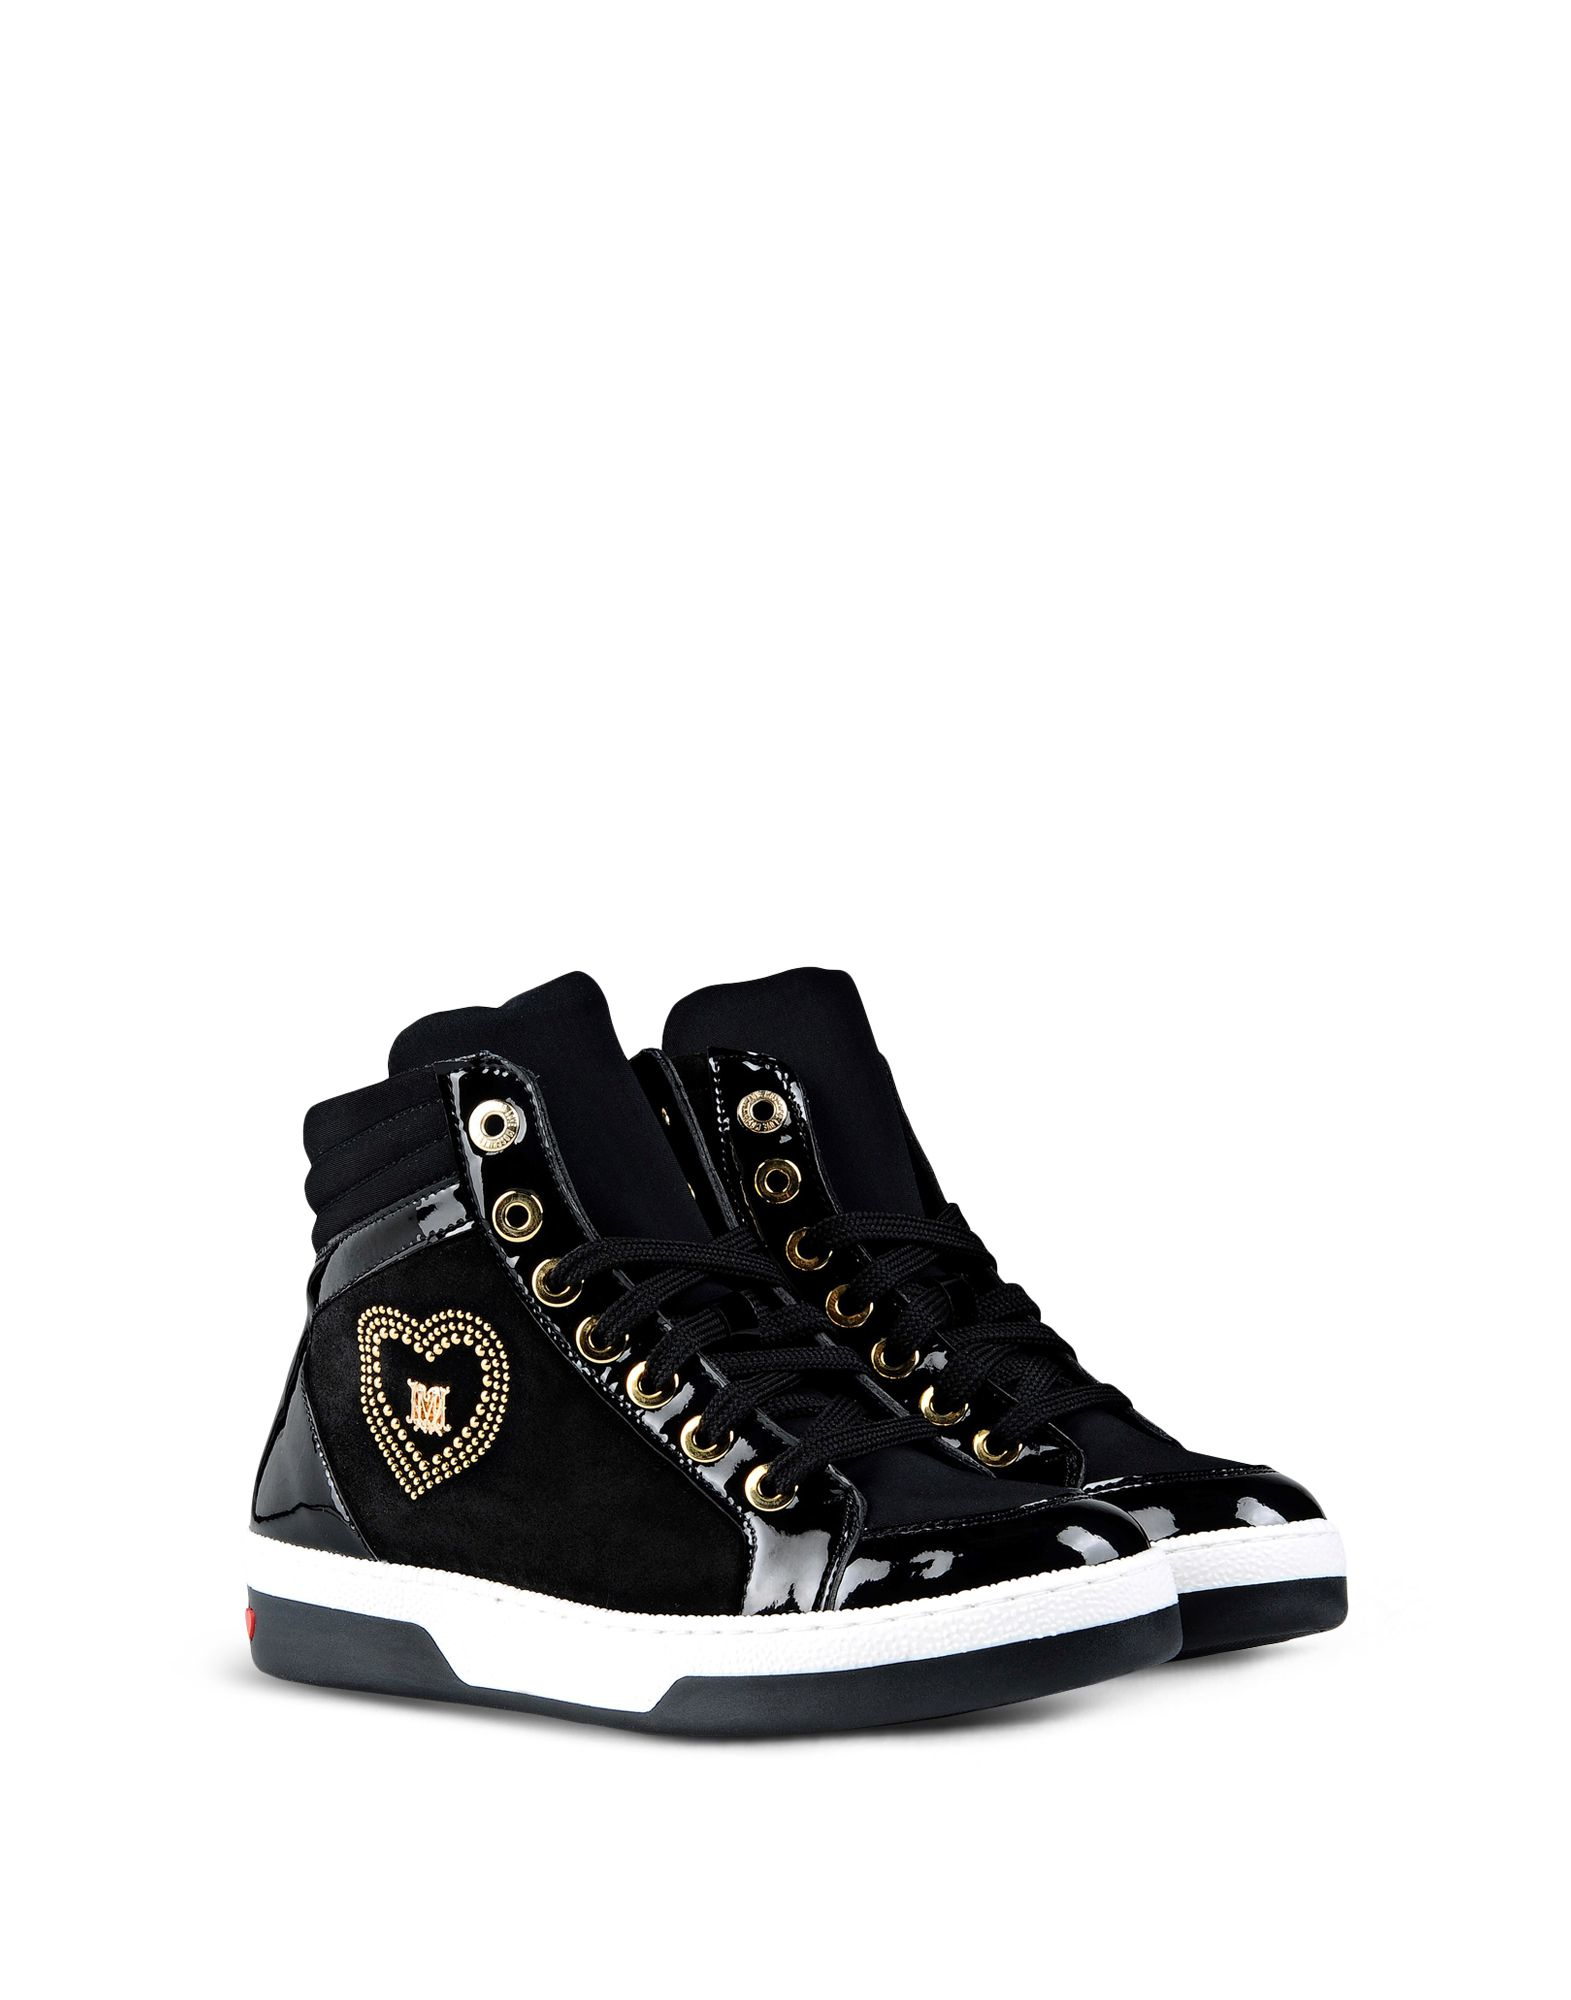 Lyst - Love Moschino High-top Sneaker in Black